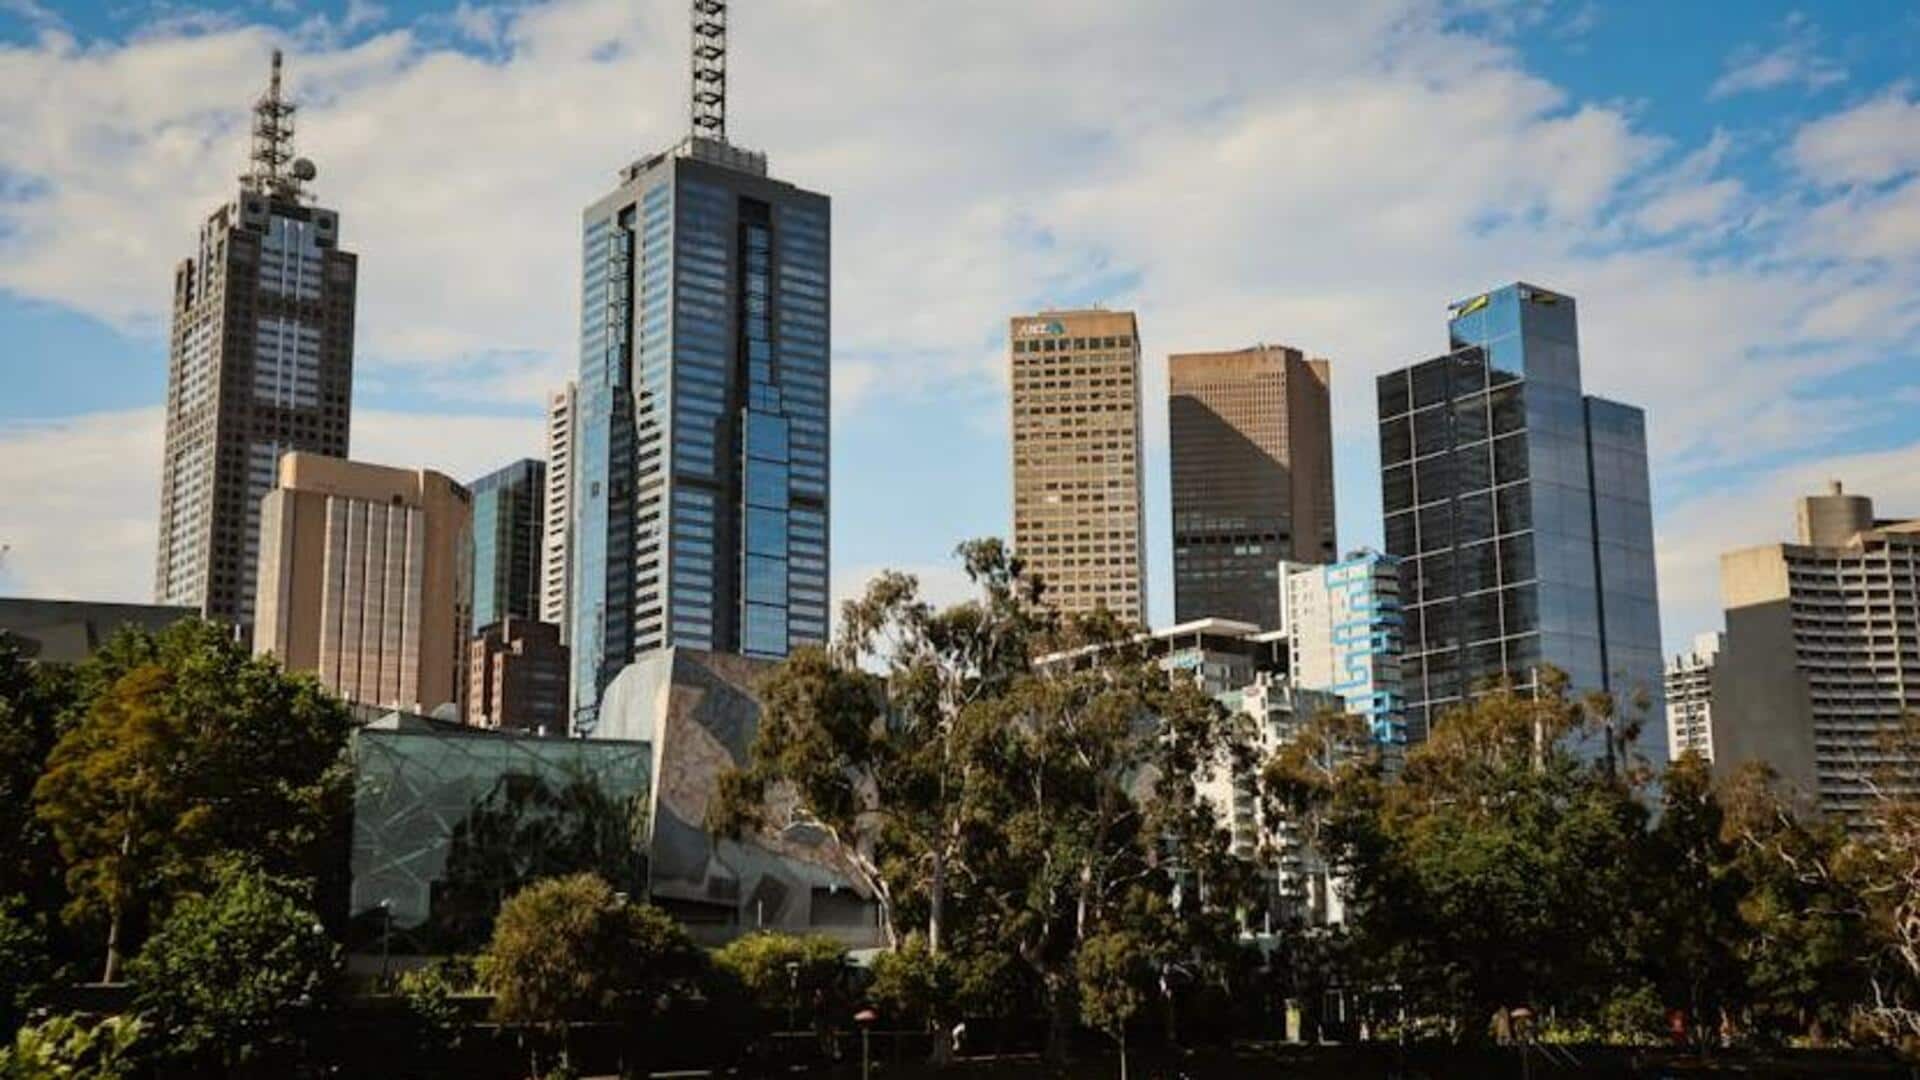 Add Melbourne's hidden gems to your itinerary